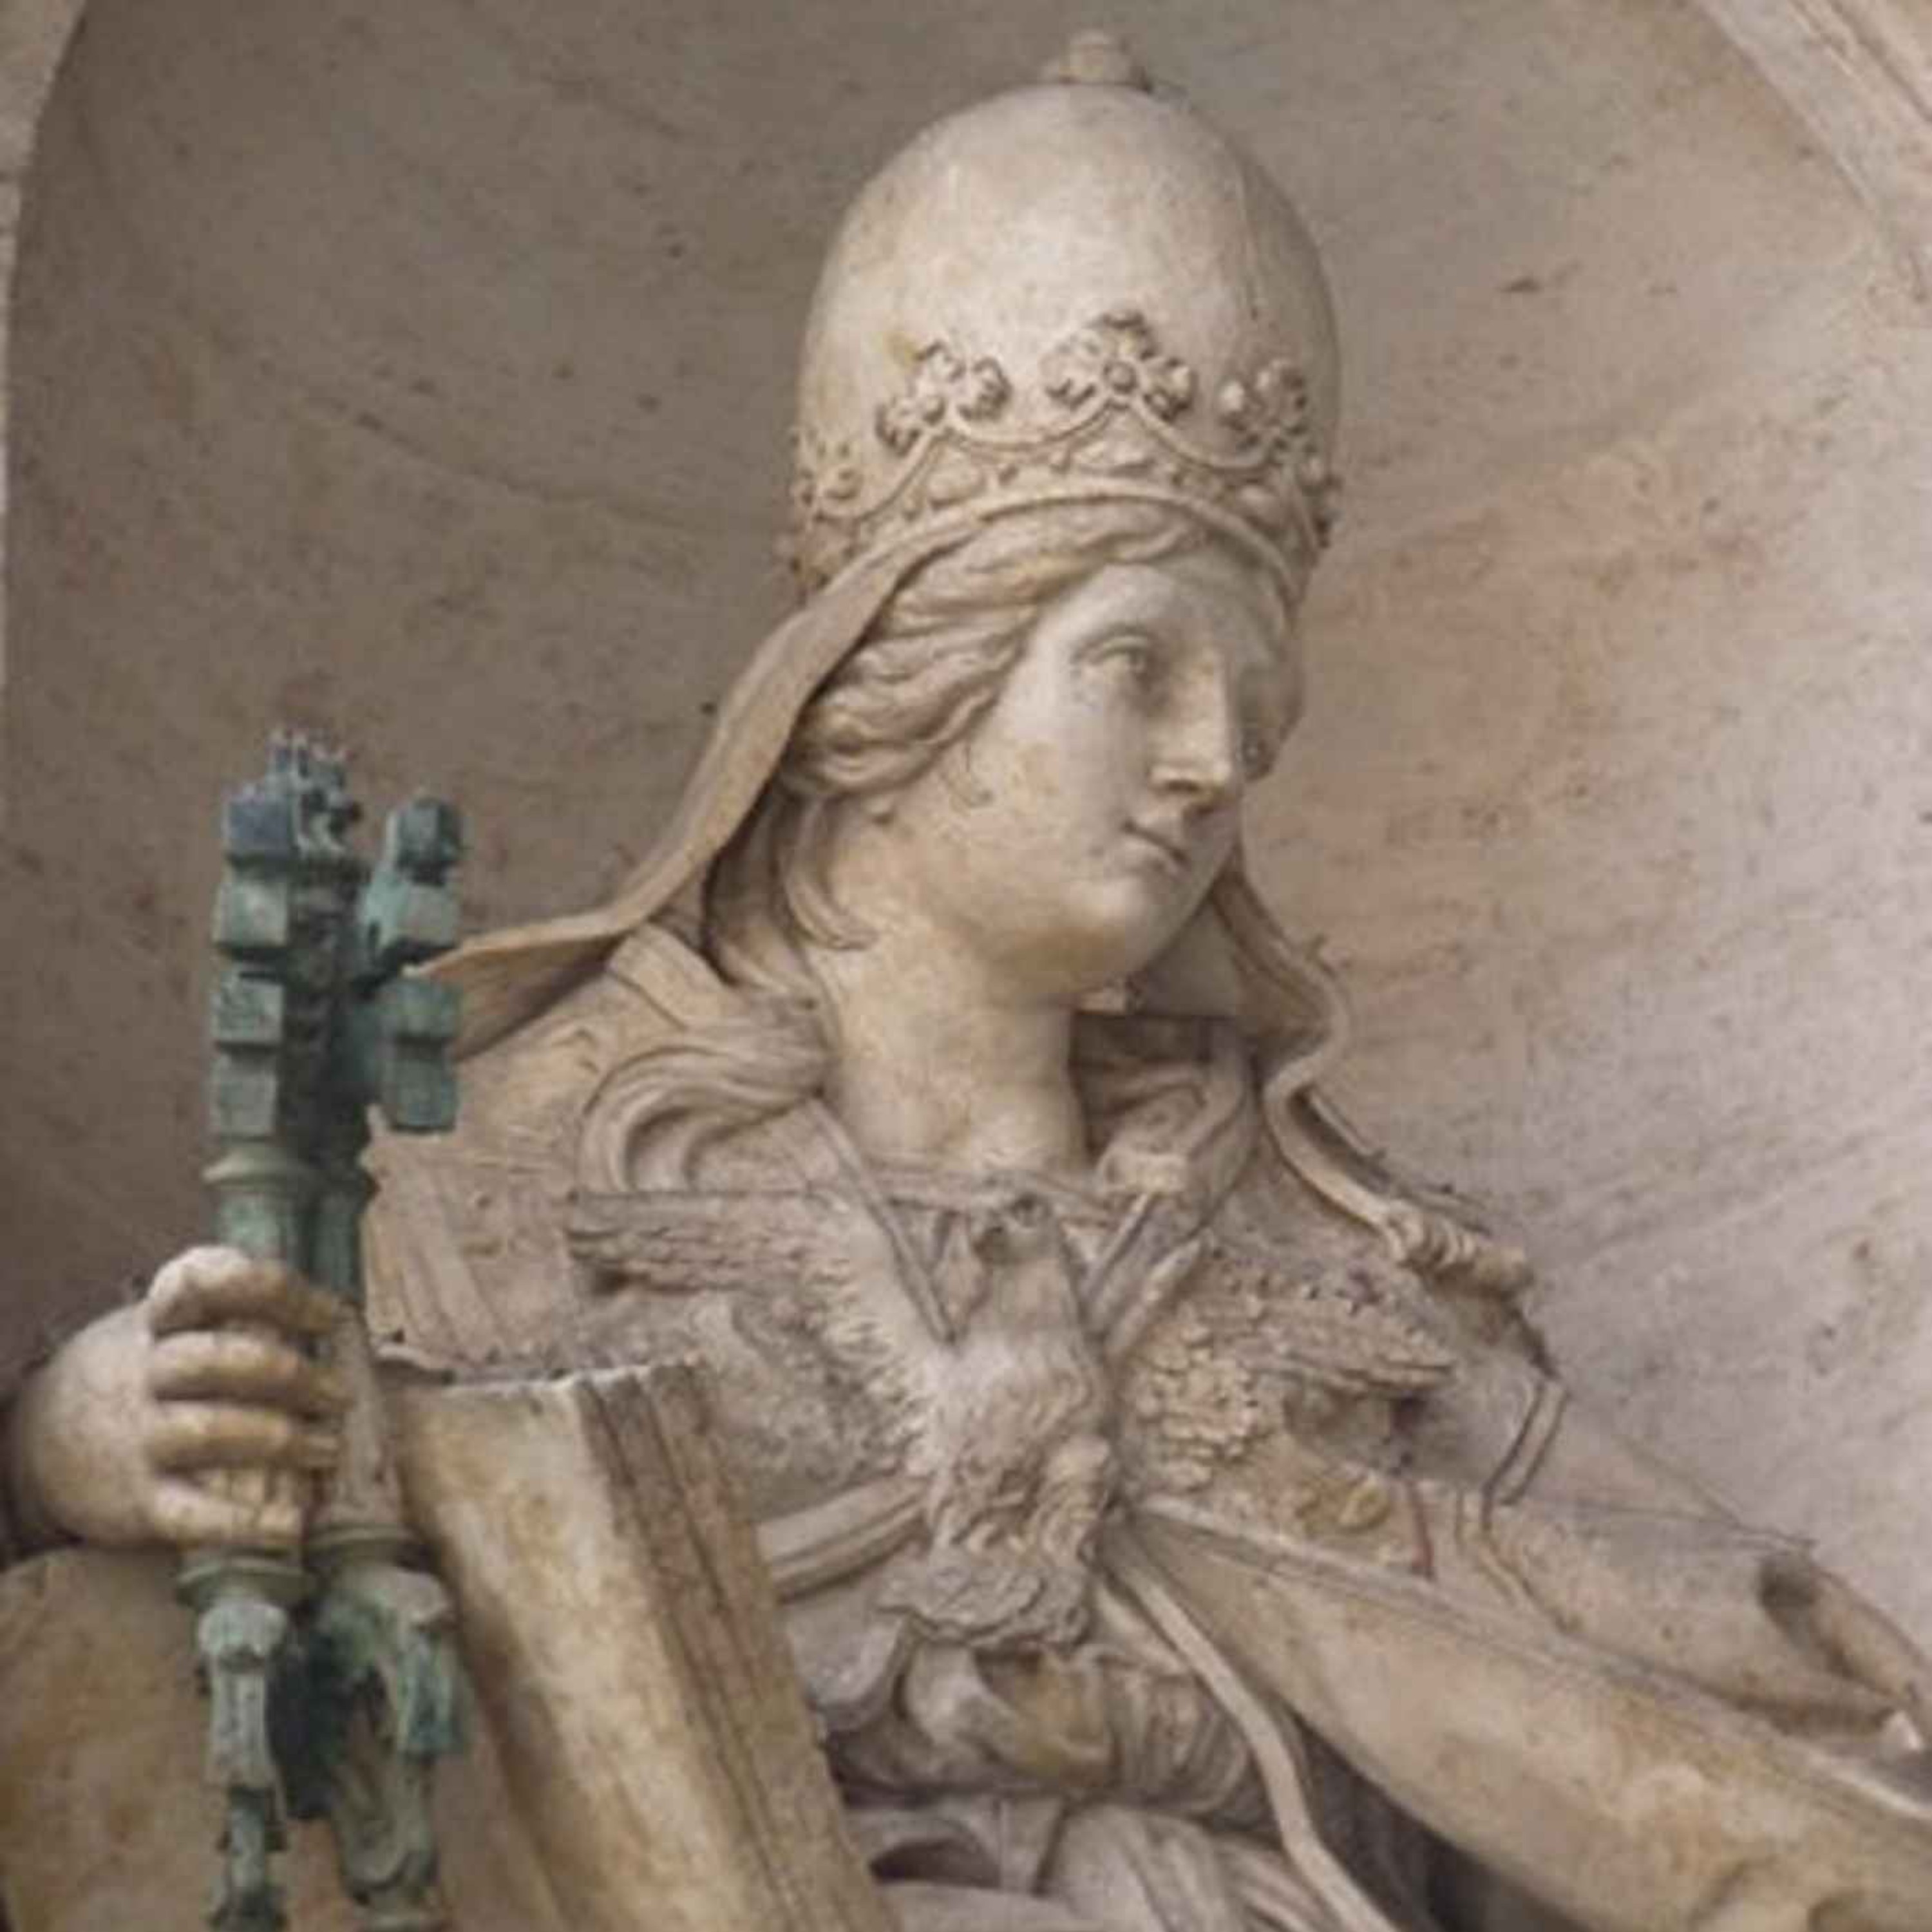 4.01 Popesses: Female power and the papacy